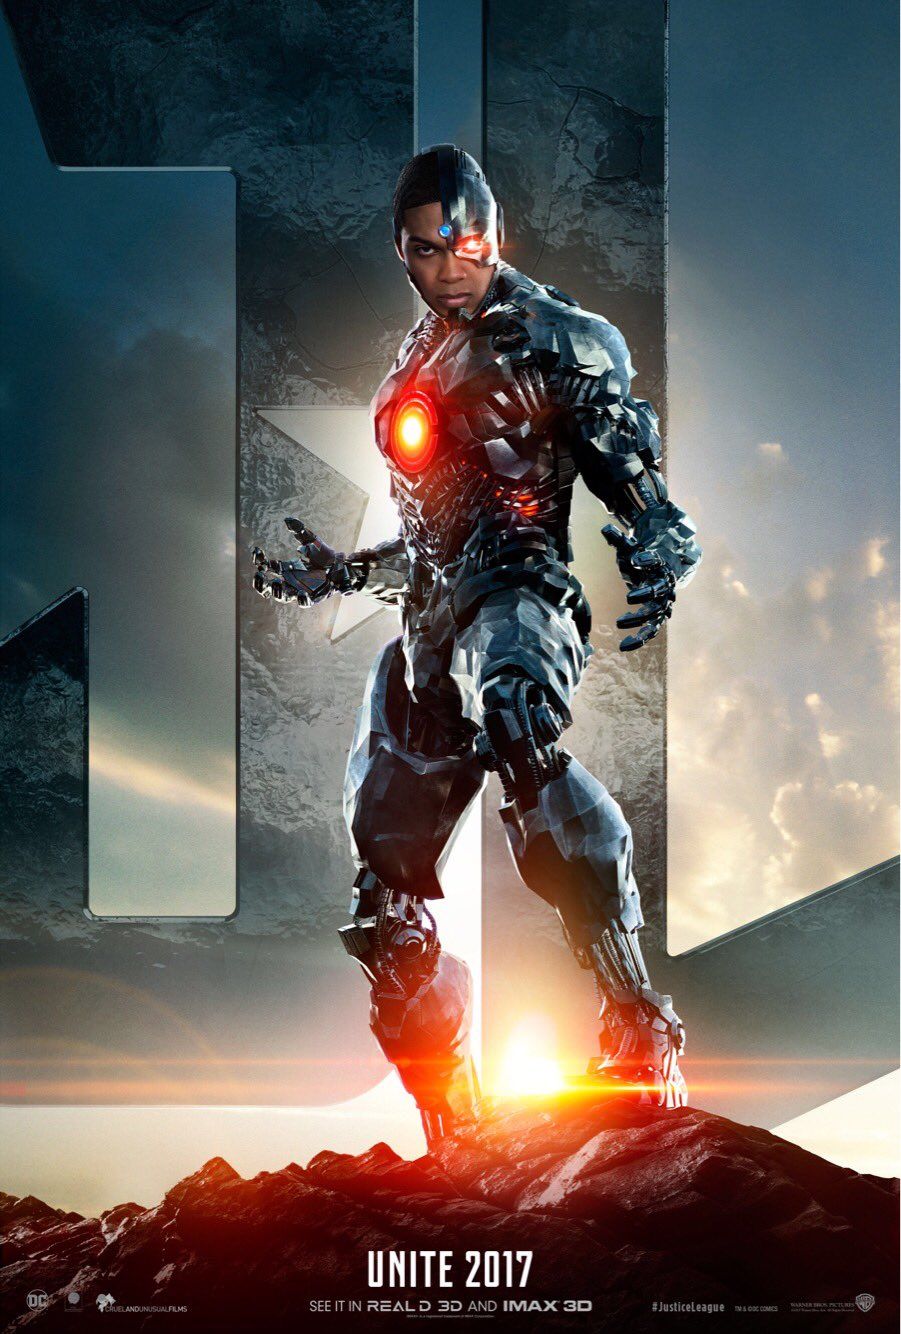 Justice League Cyborg Poster